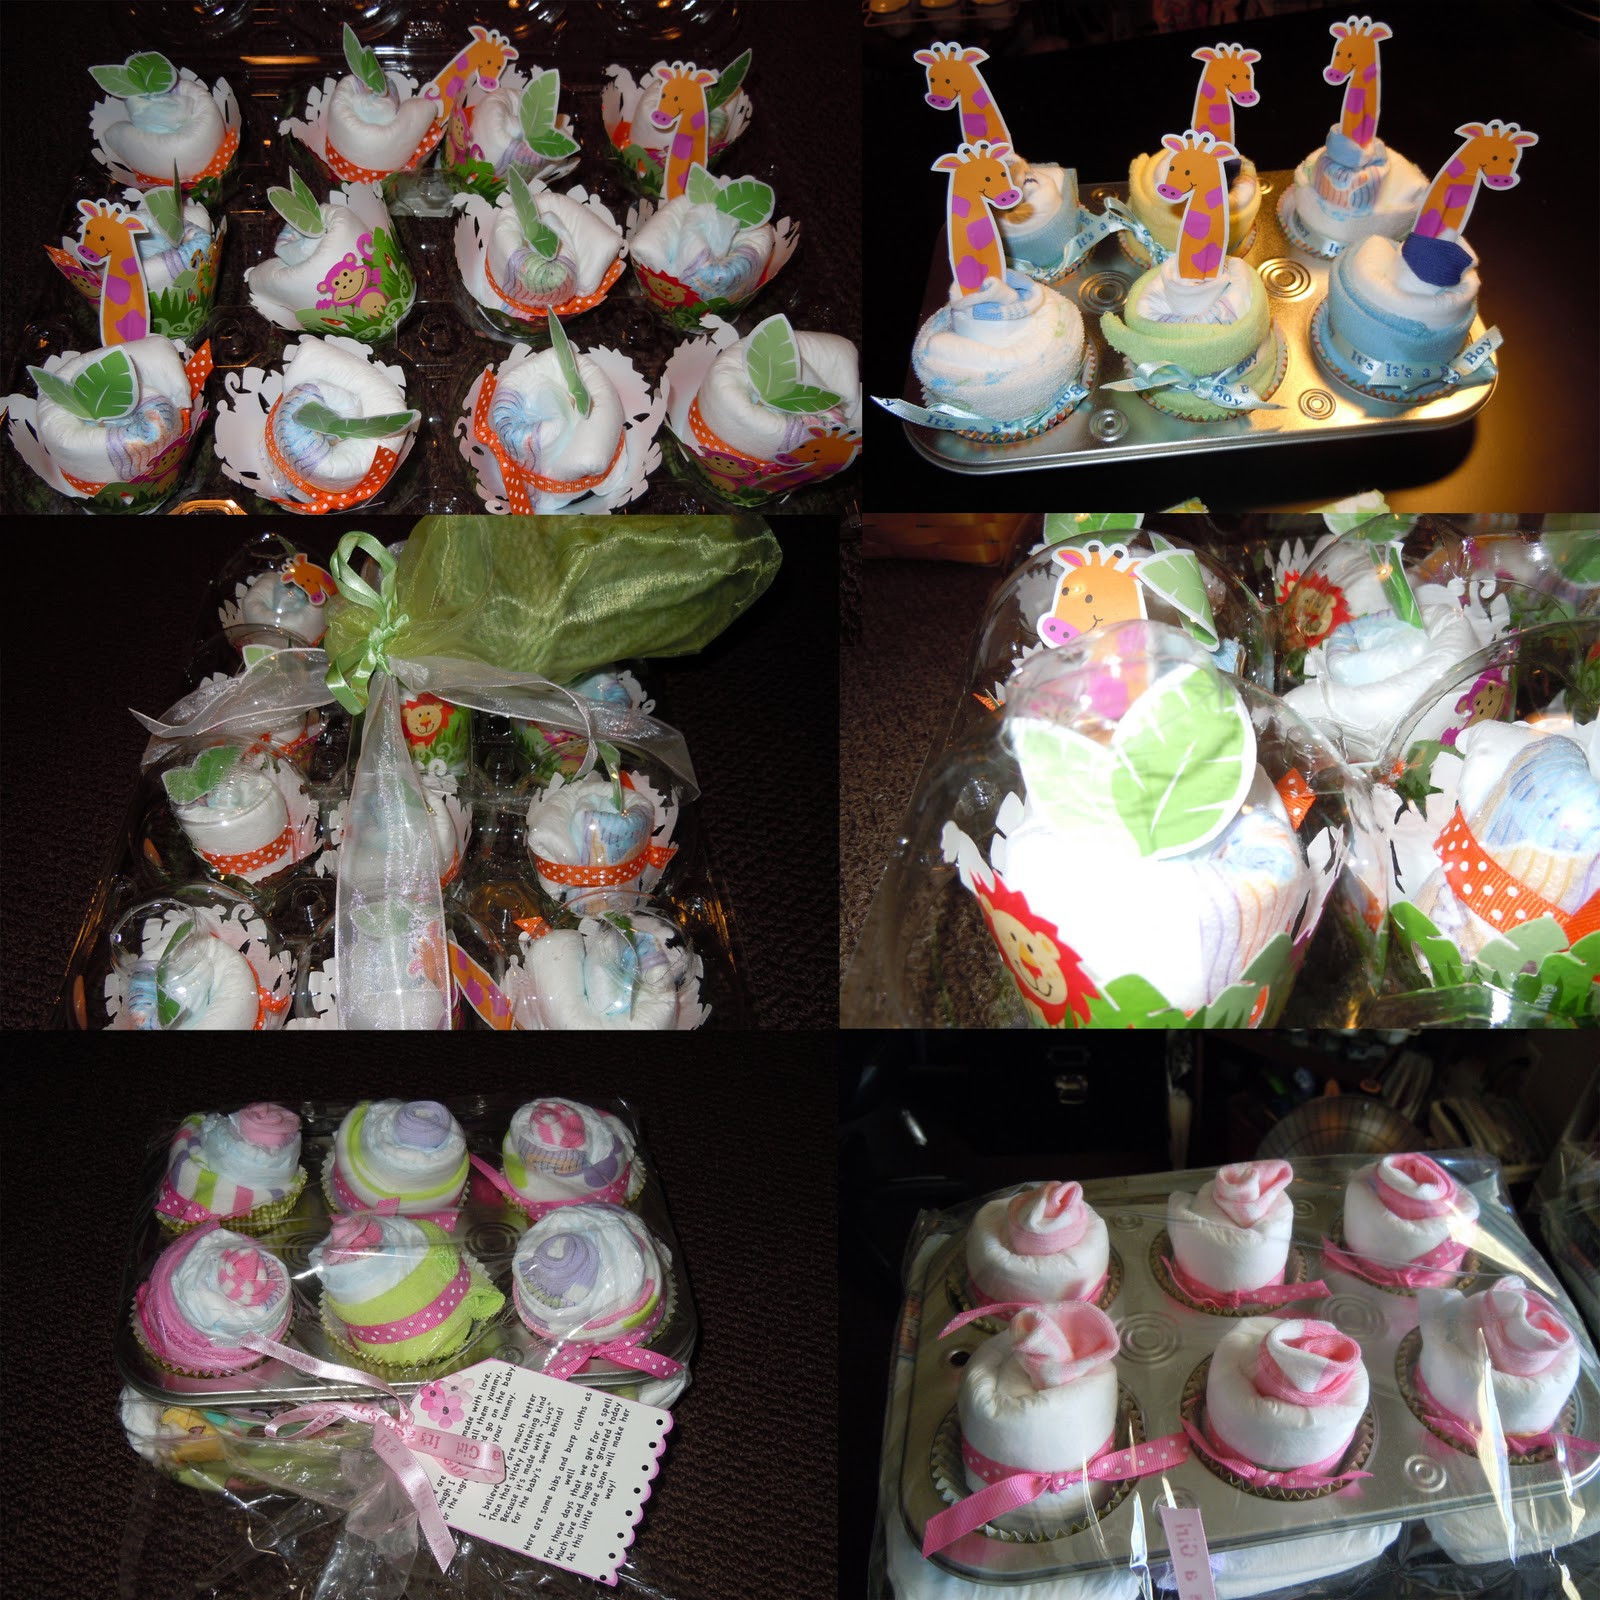 Baby Shower Gifts Made With Diapers
 My Happy Place Diaper Cupcakes for Baby Shower Gifts